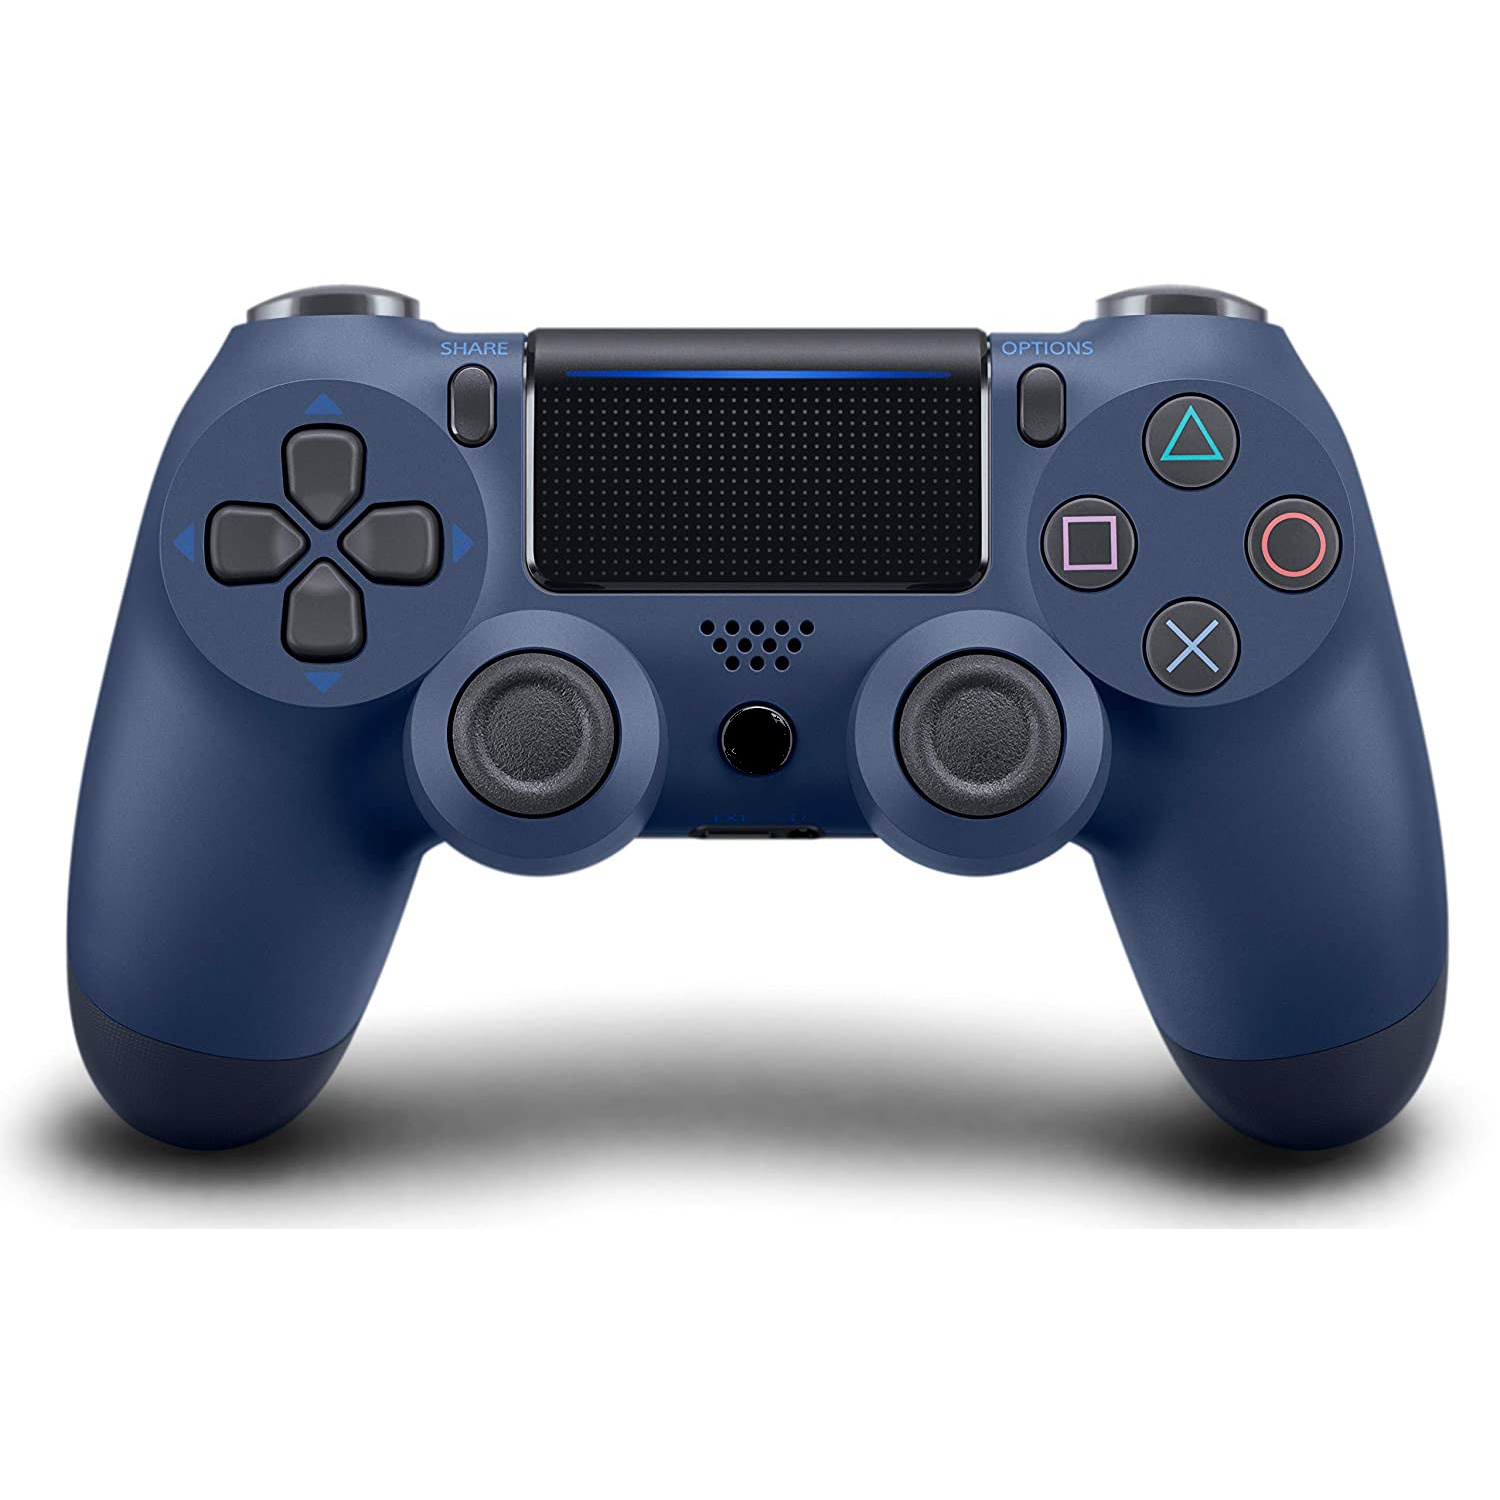 Wireless Controller Joystick for PS4 Sony Playstation with Charging Cable (Midnight Blue)